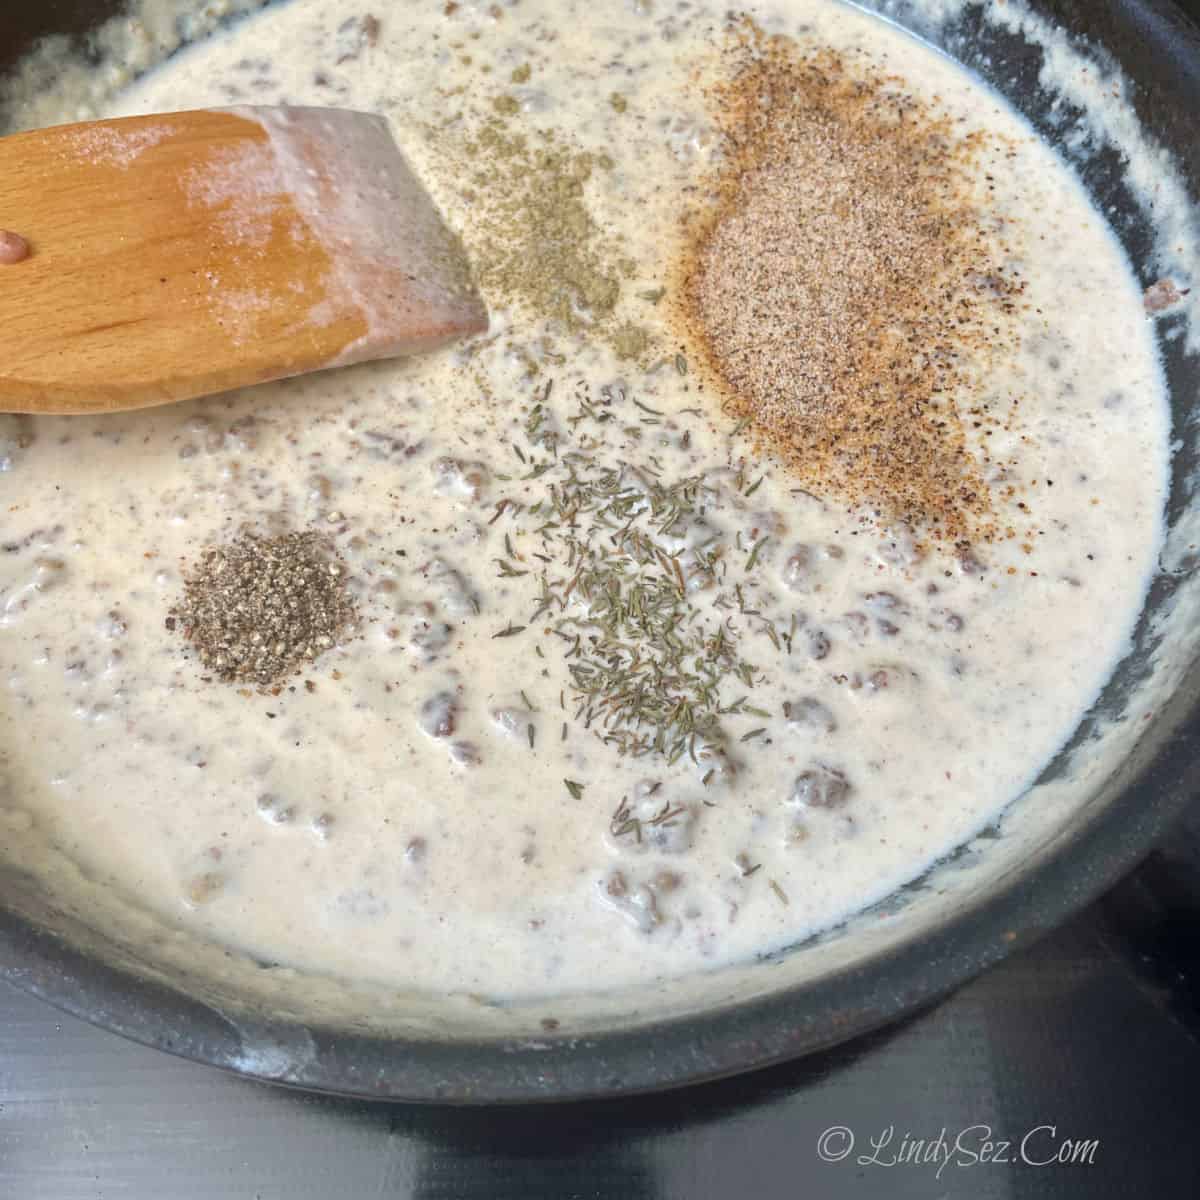 Spices being added to sausage gravy.